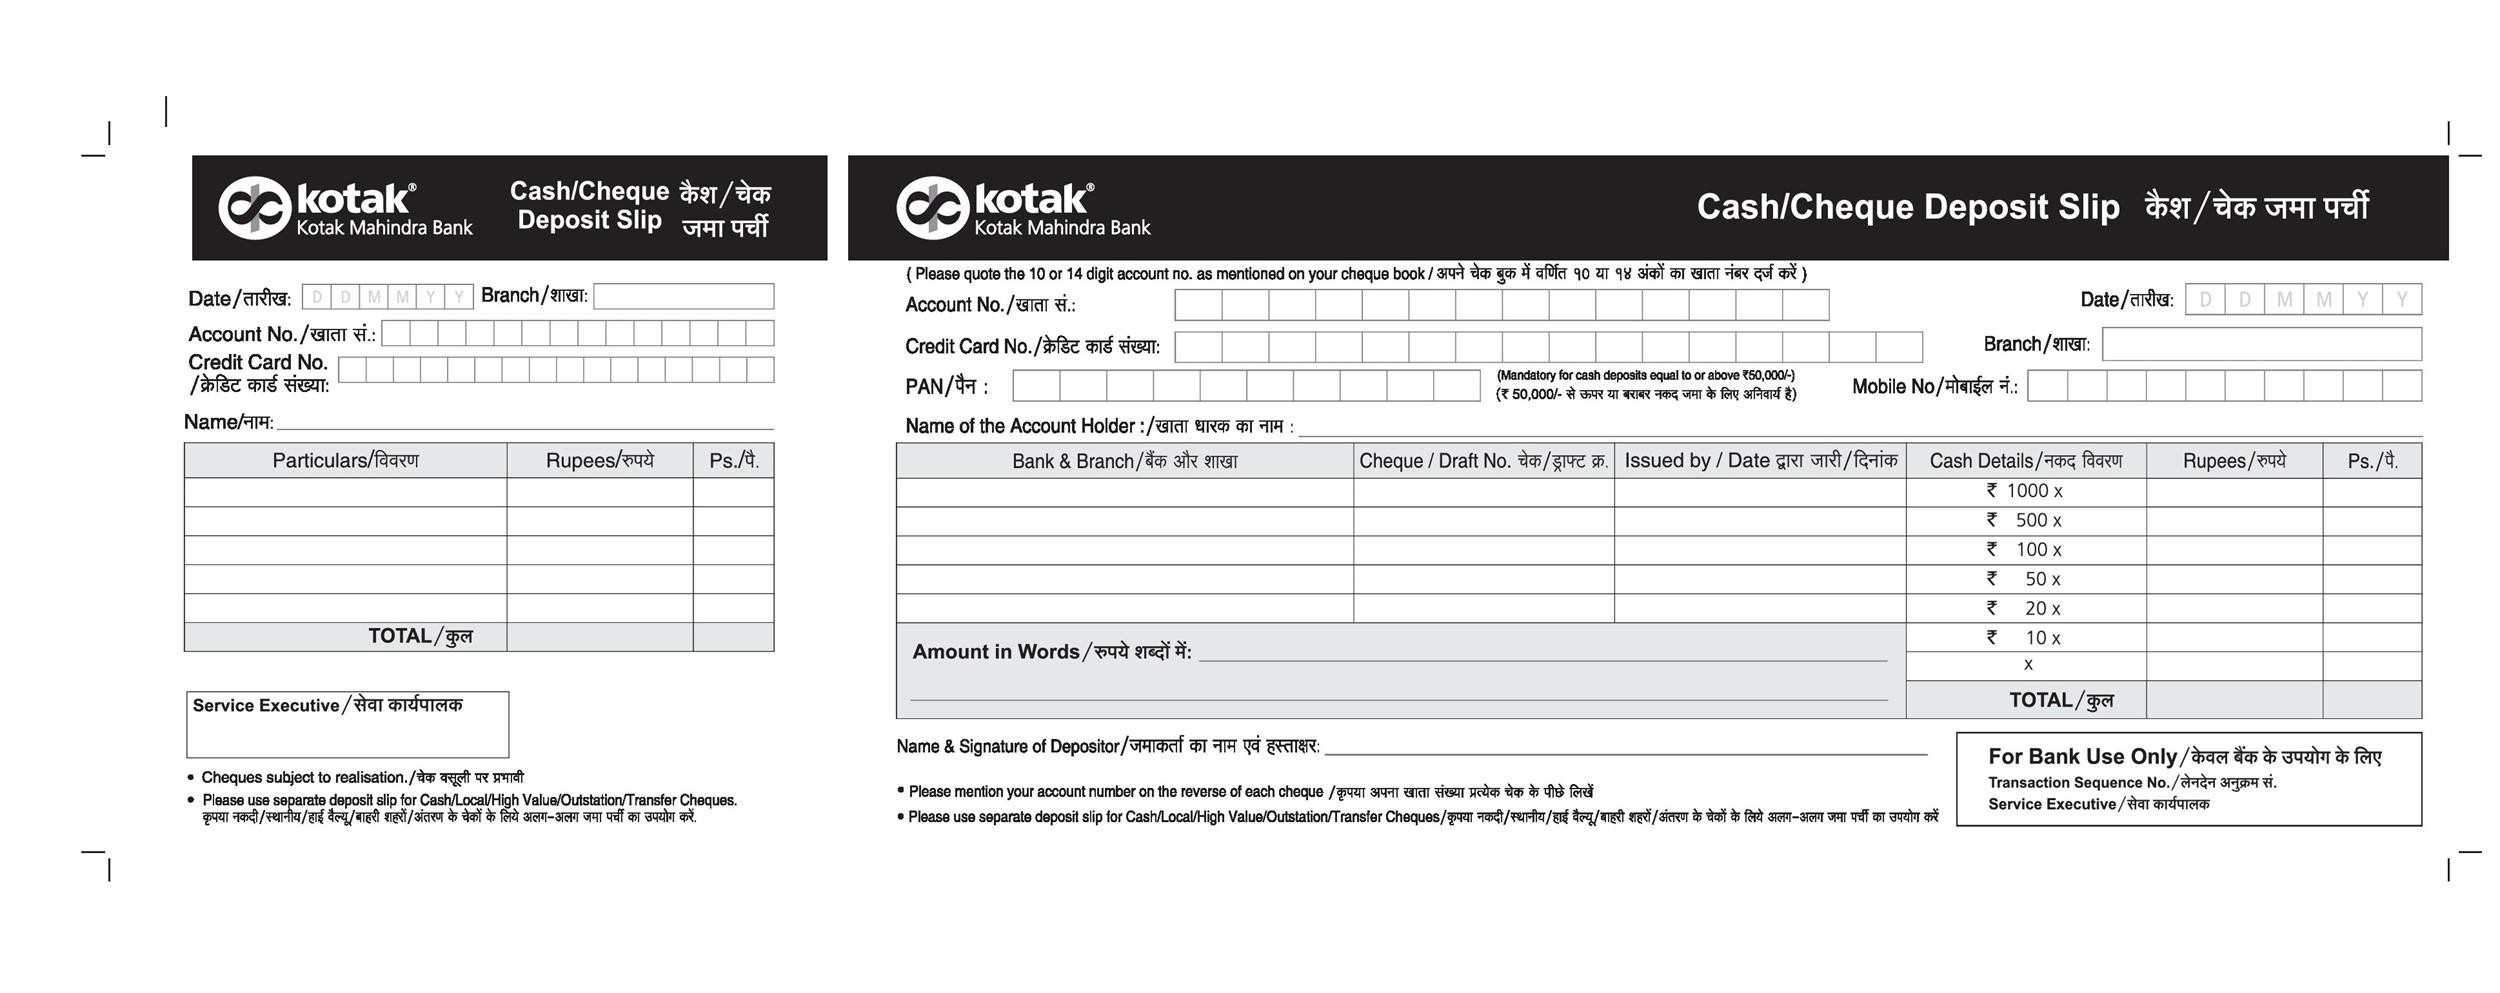 Howto: How To Fill Out A Checking Account Deposit Slip Inside Regions Bank Deposit Slip Template Intended For Regions Bank Deposit Slip Template